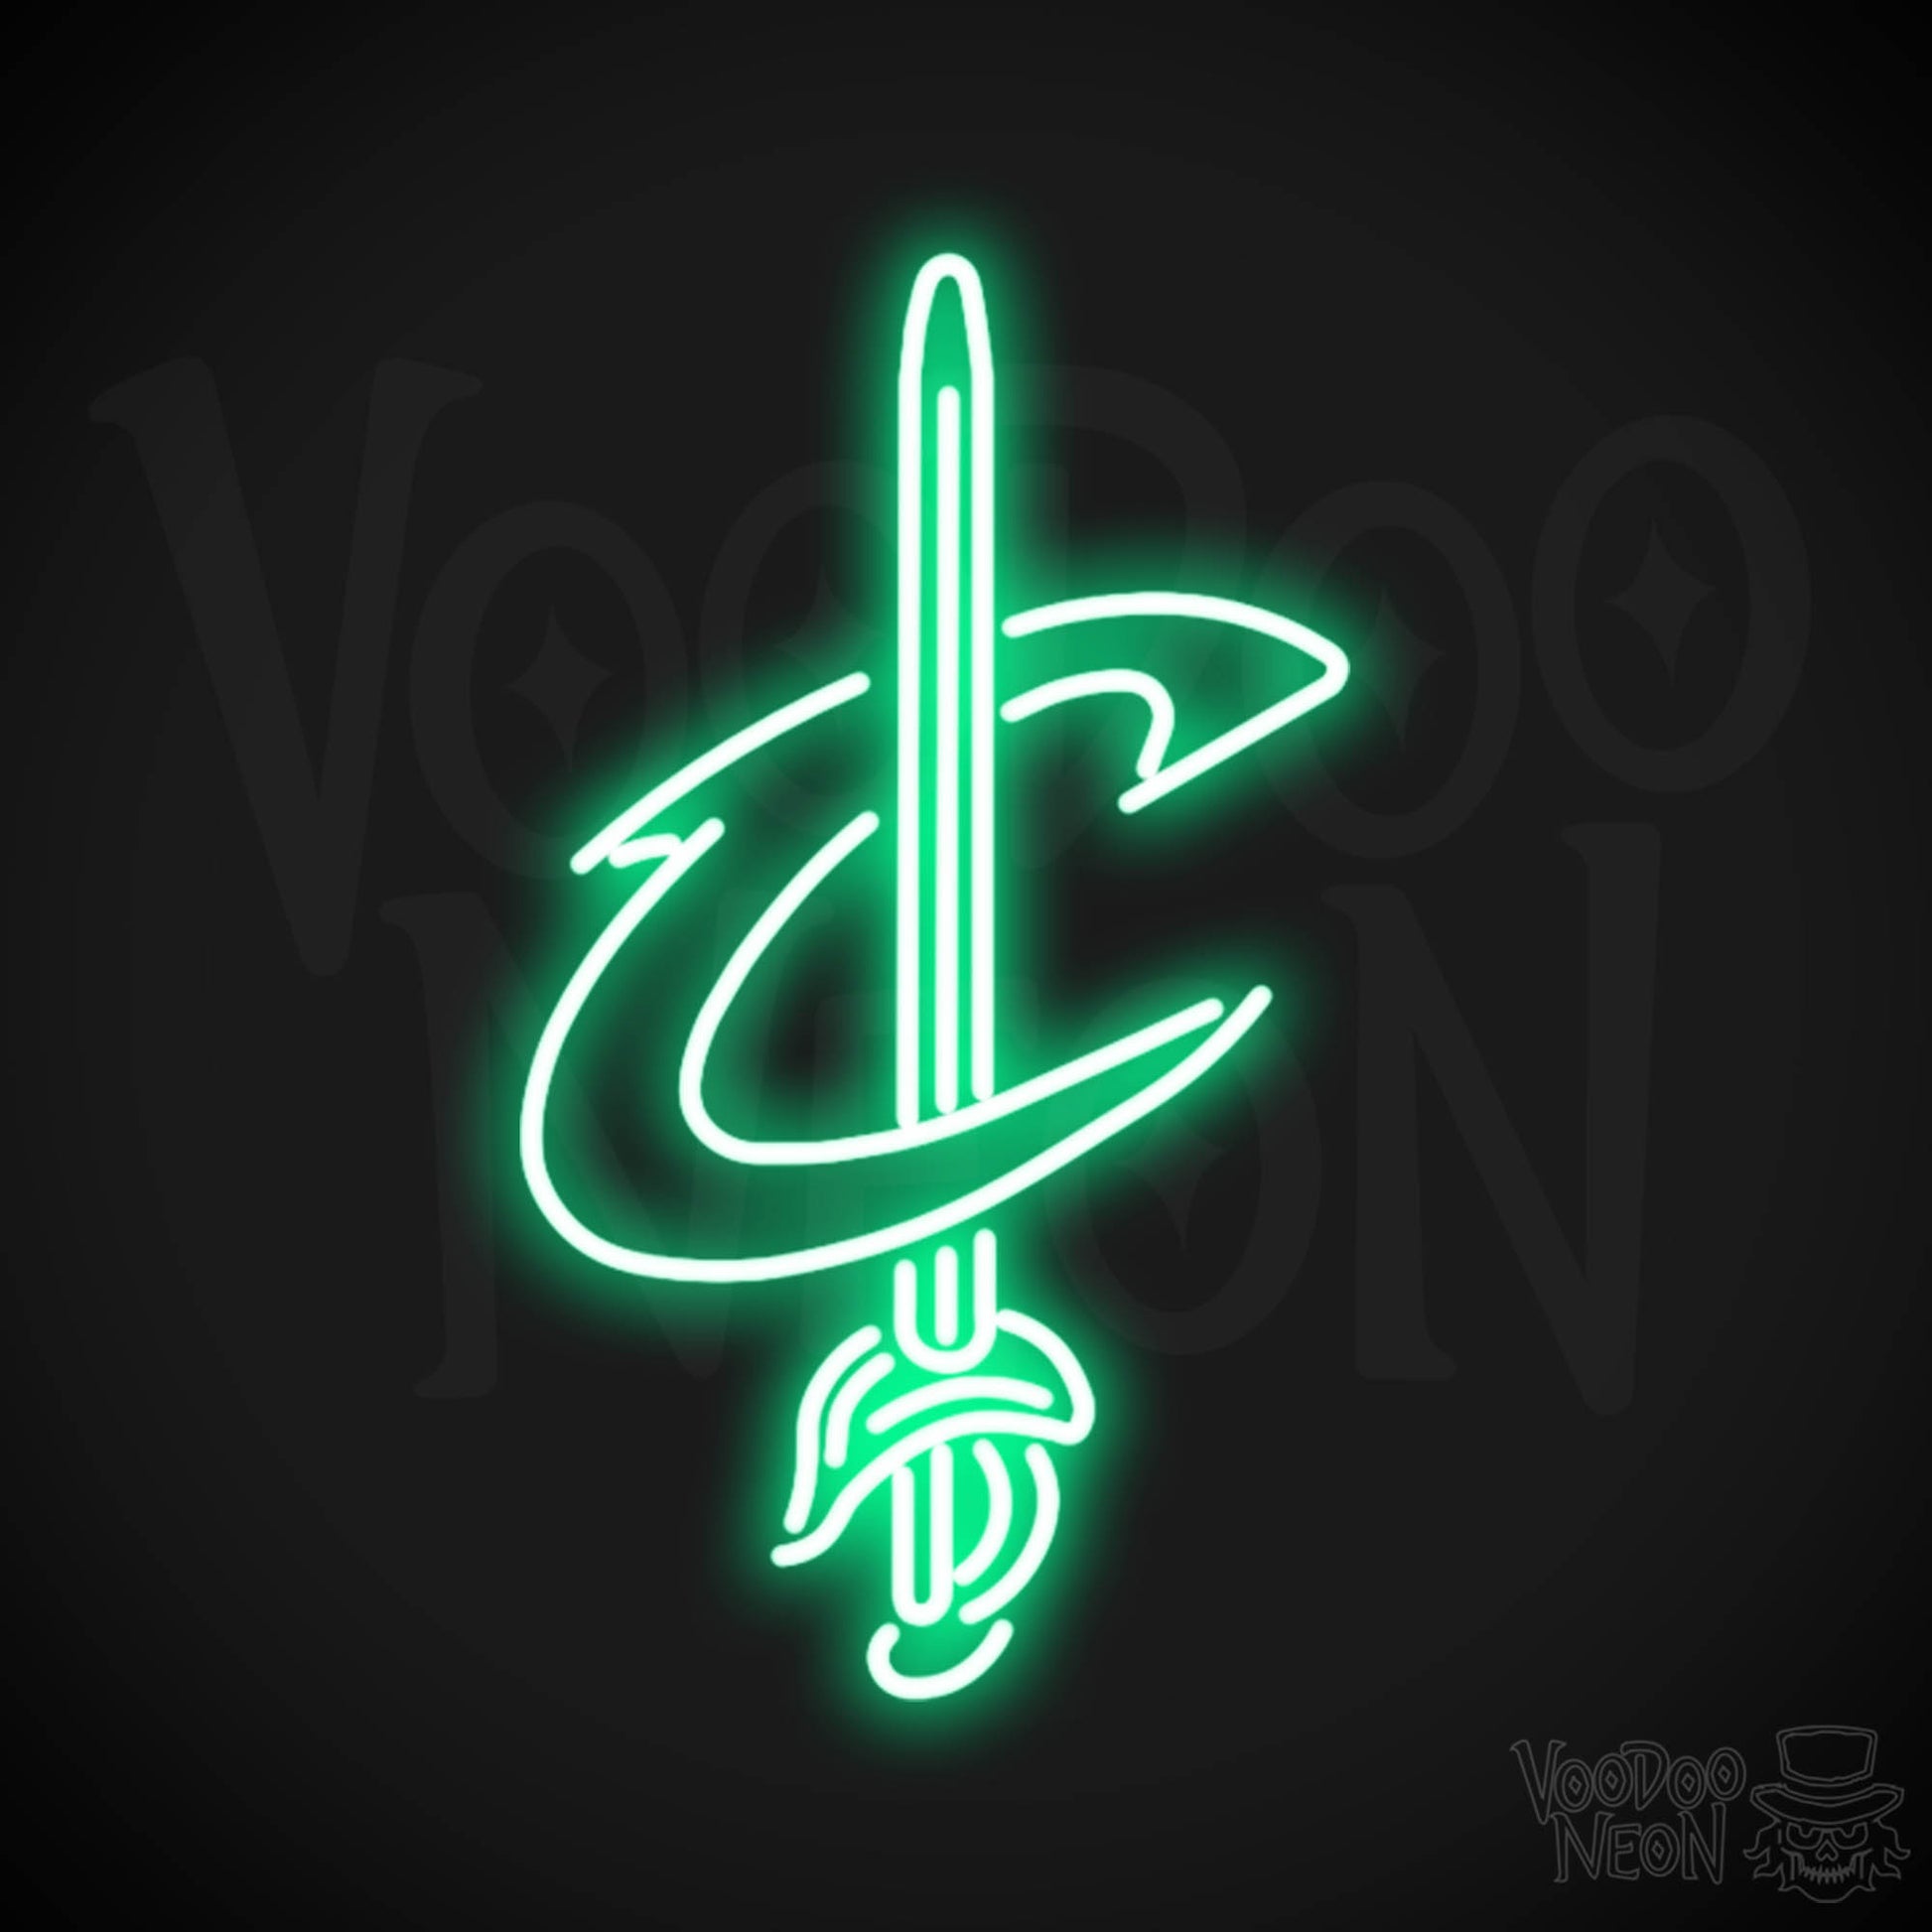 Cleveland Cavaliers Neon Sign - Cleveland Cavaliers Sign - Neon Cavaliers Wall Art - Color Green